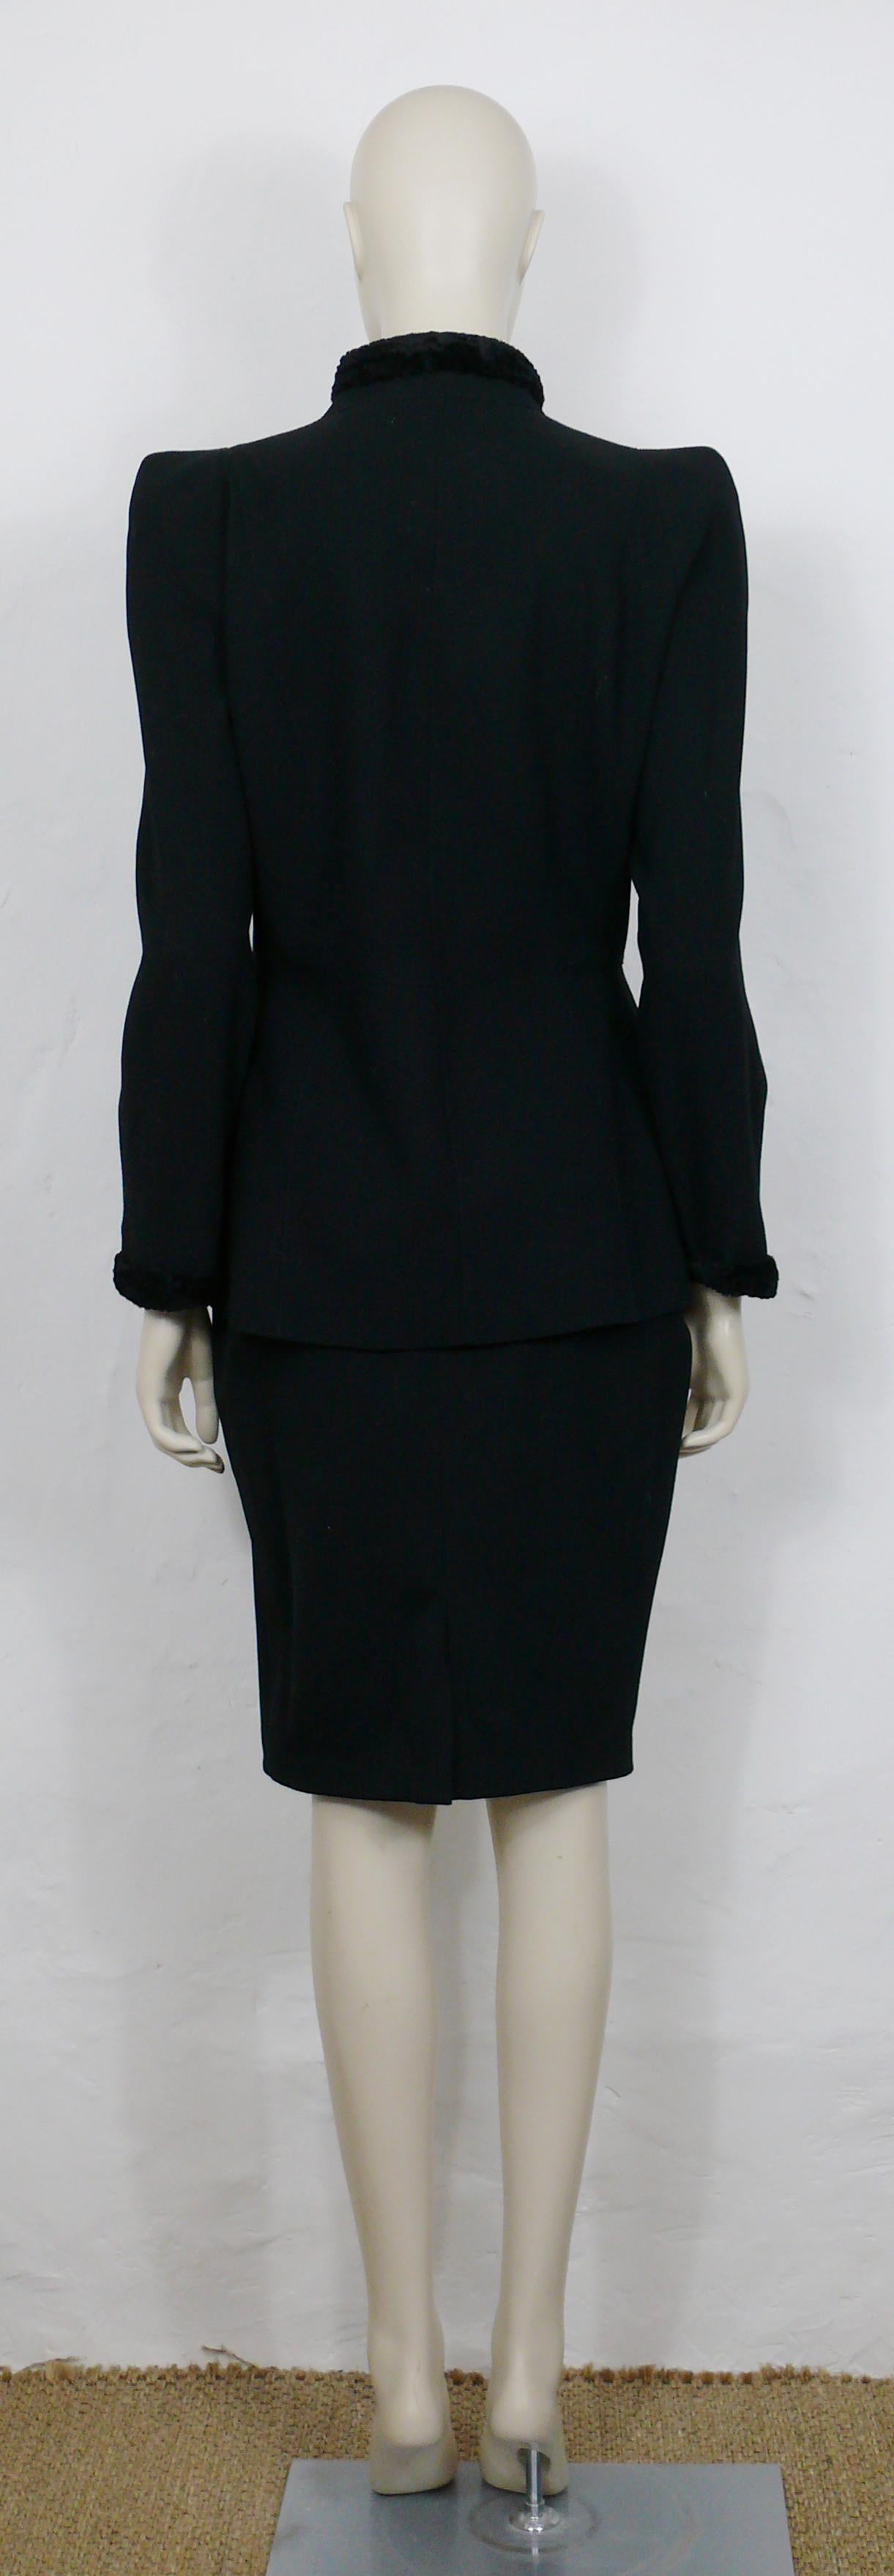 Thierry Mugler Vintage Black Wool & Claw Ornaments Skirt Suit For Sale 5